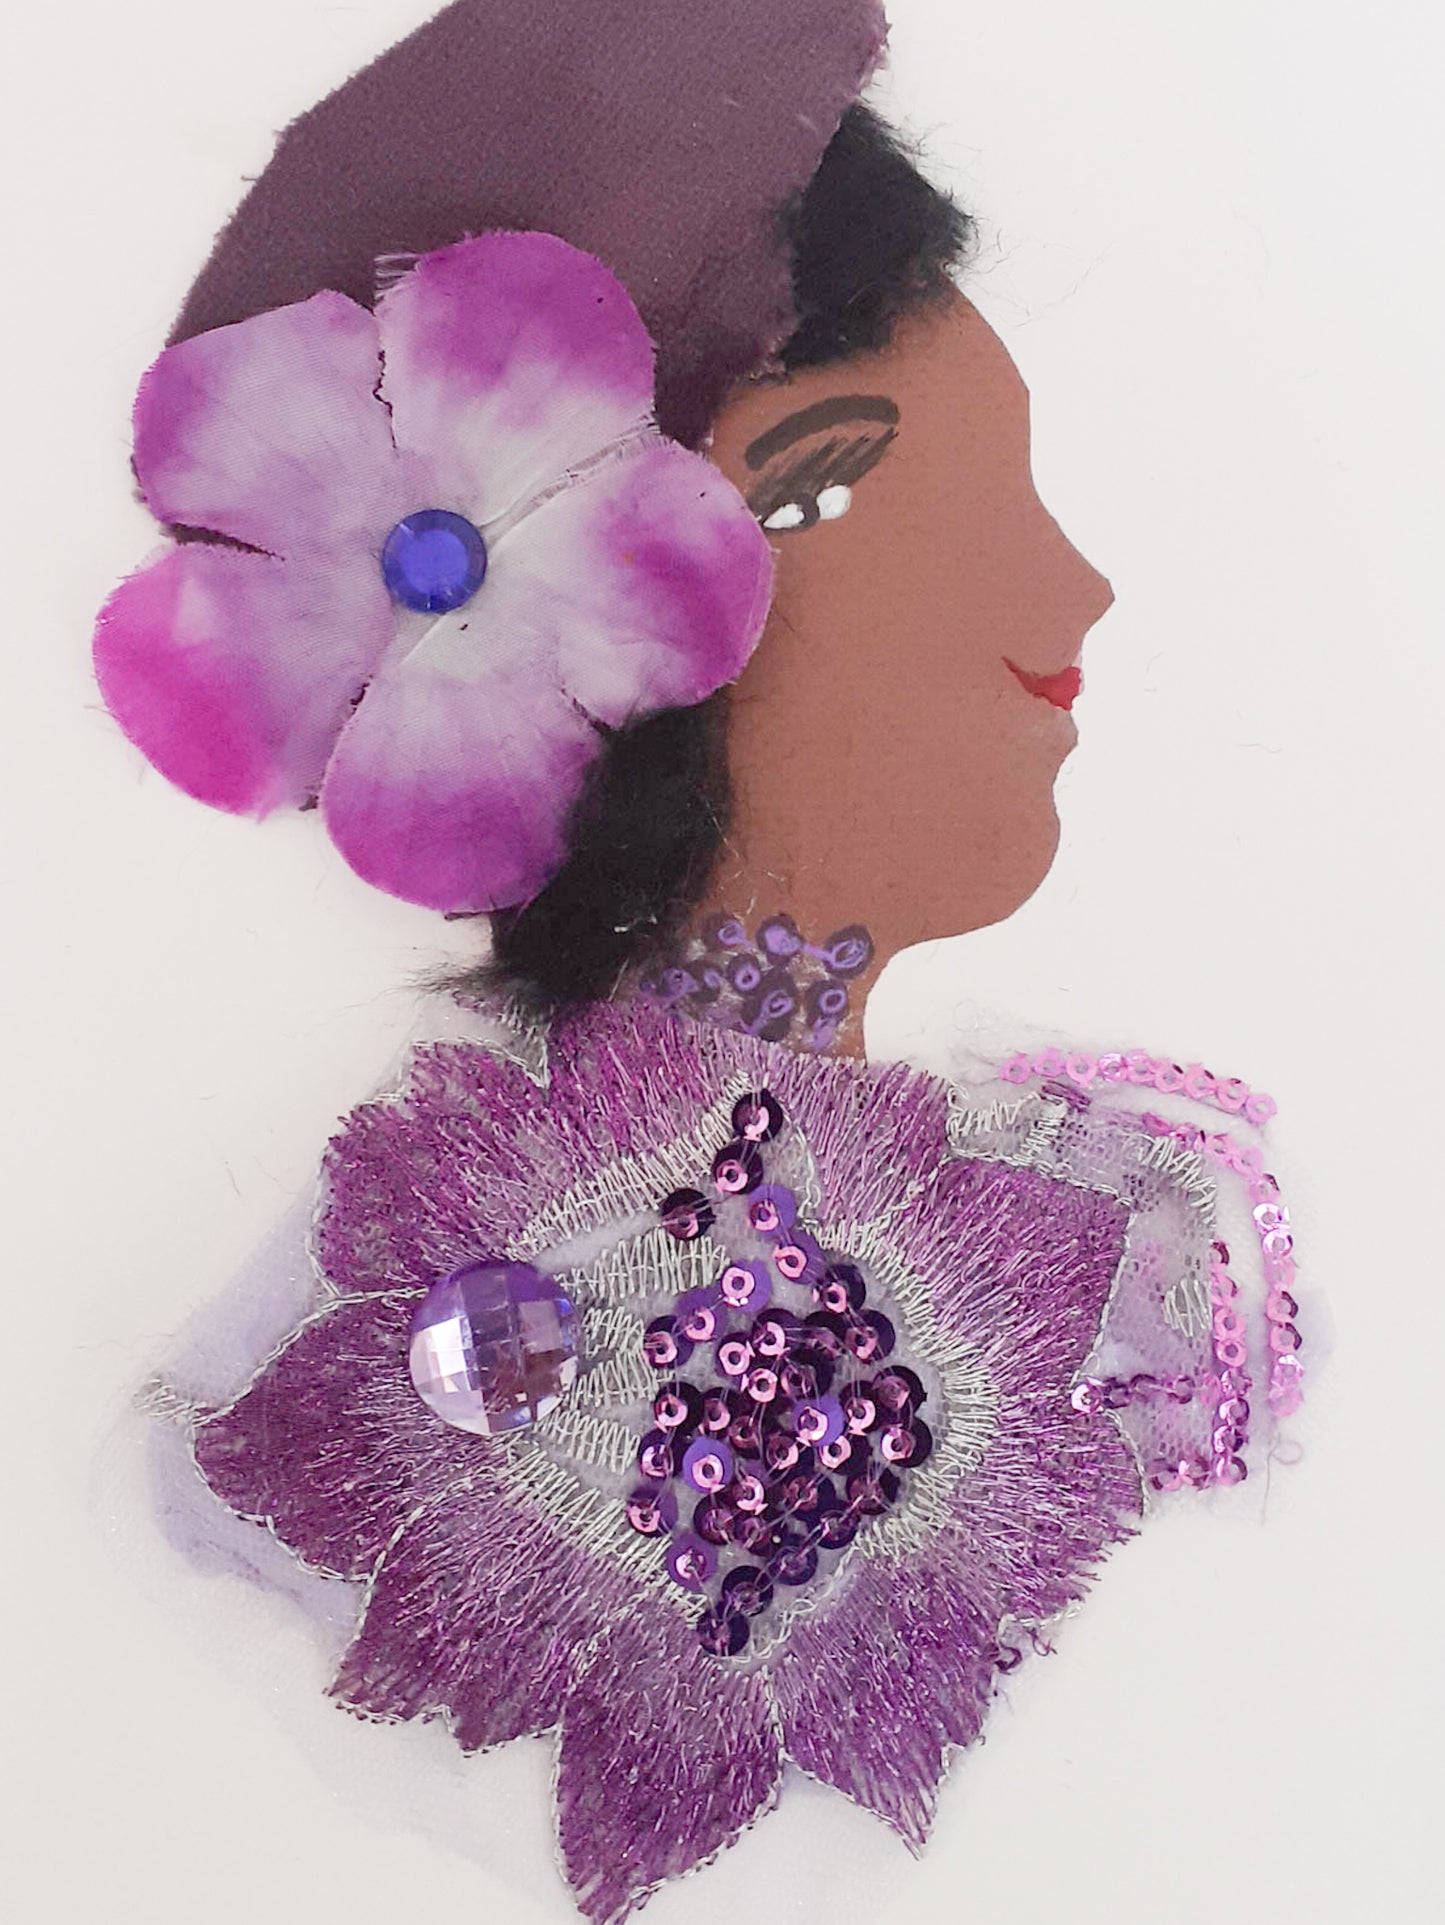 I designed this card of a woman named Rosado Upney. She has a brown skin tone and is wearing a purple dress with a flower on her hair and has a soft hat. She's complemented with a pair of gold-tinged earrings and a quilted pouch for the perfect finishing touch.